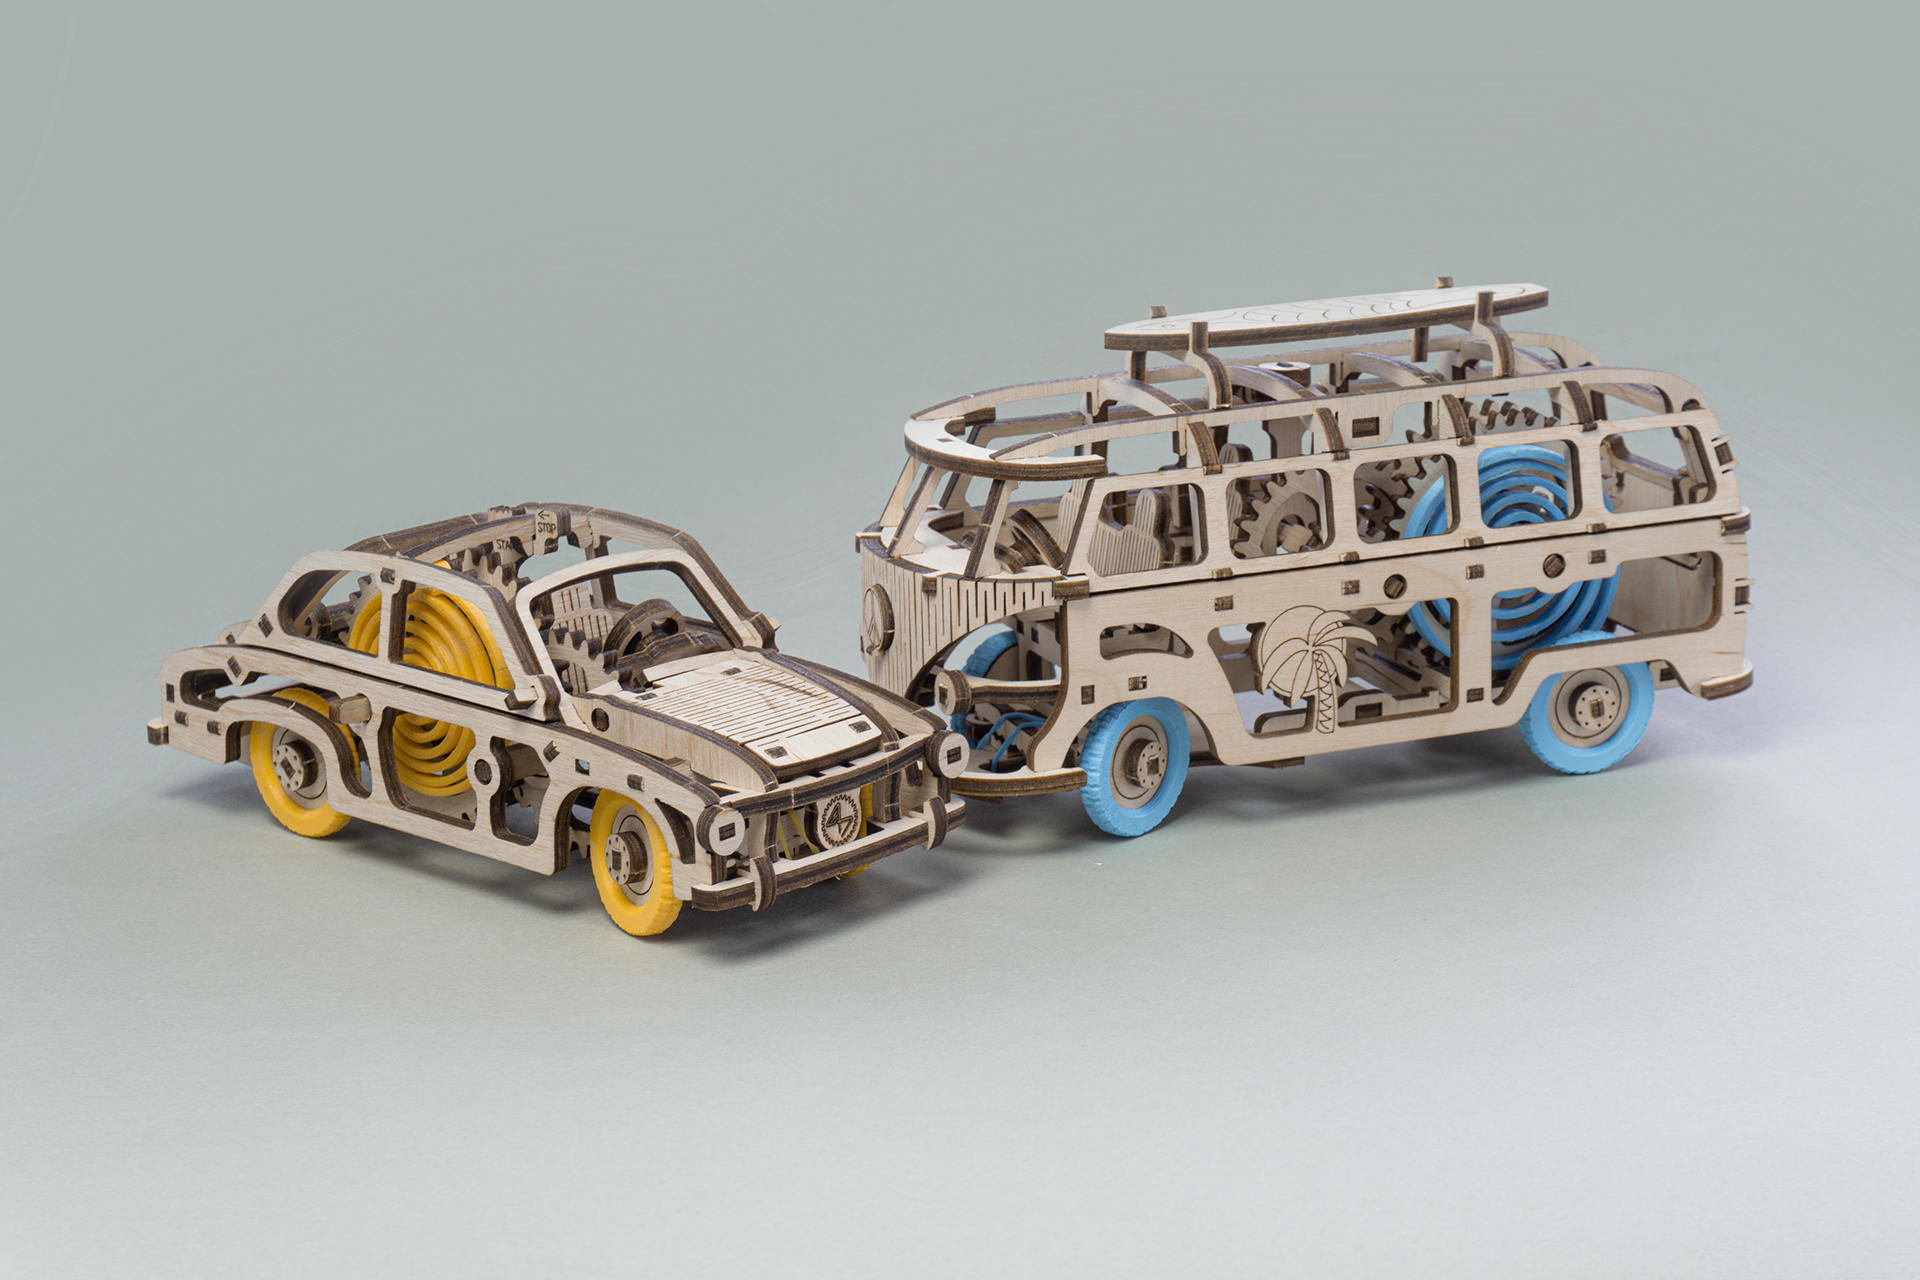 Syrena and Hippyvan (Time4Machine) on Behance